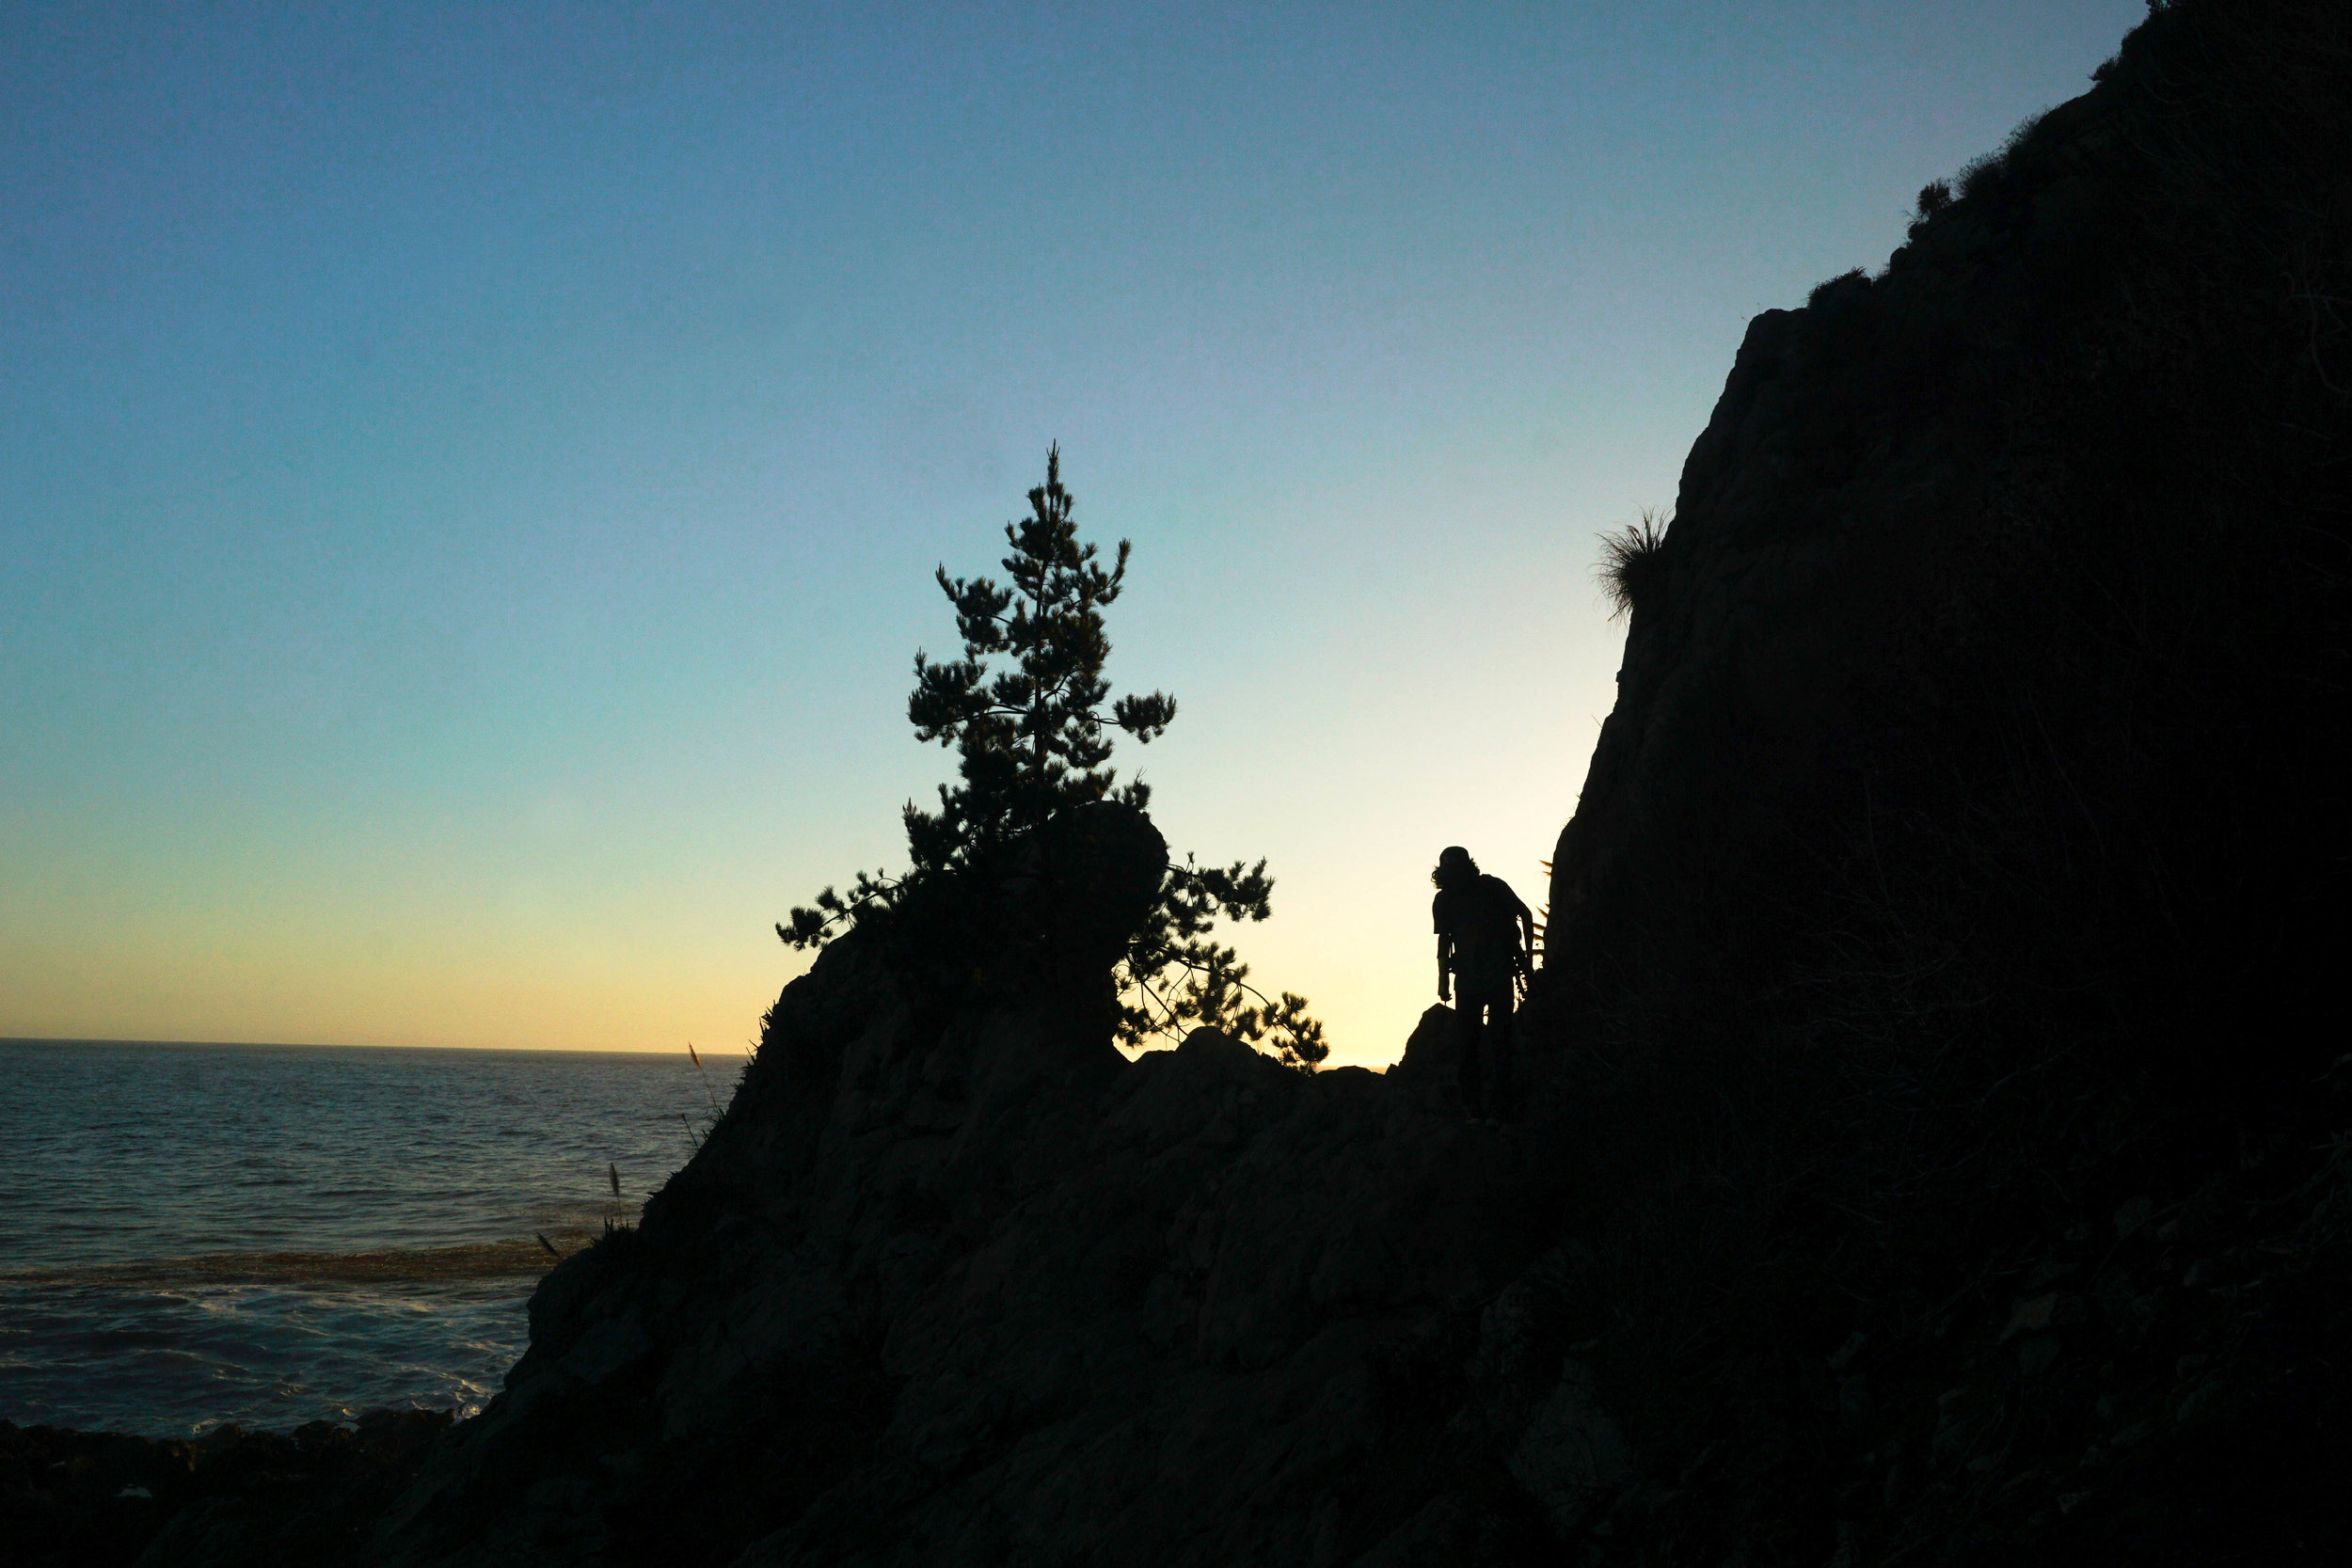 Silhouettes of the misadventure